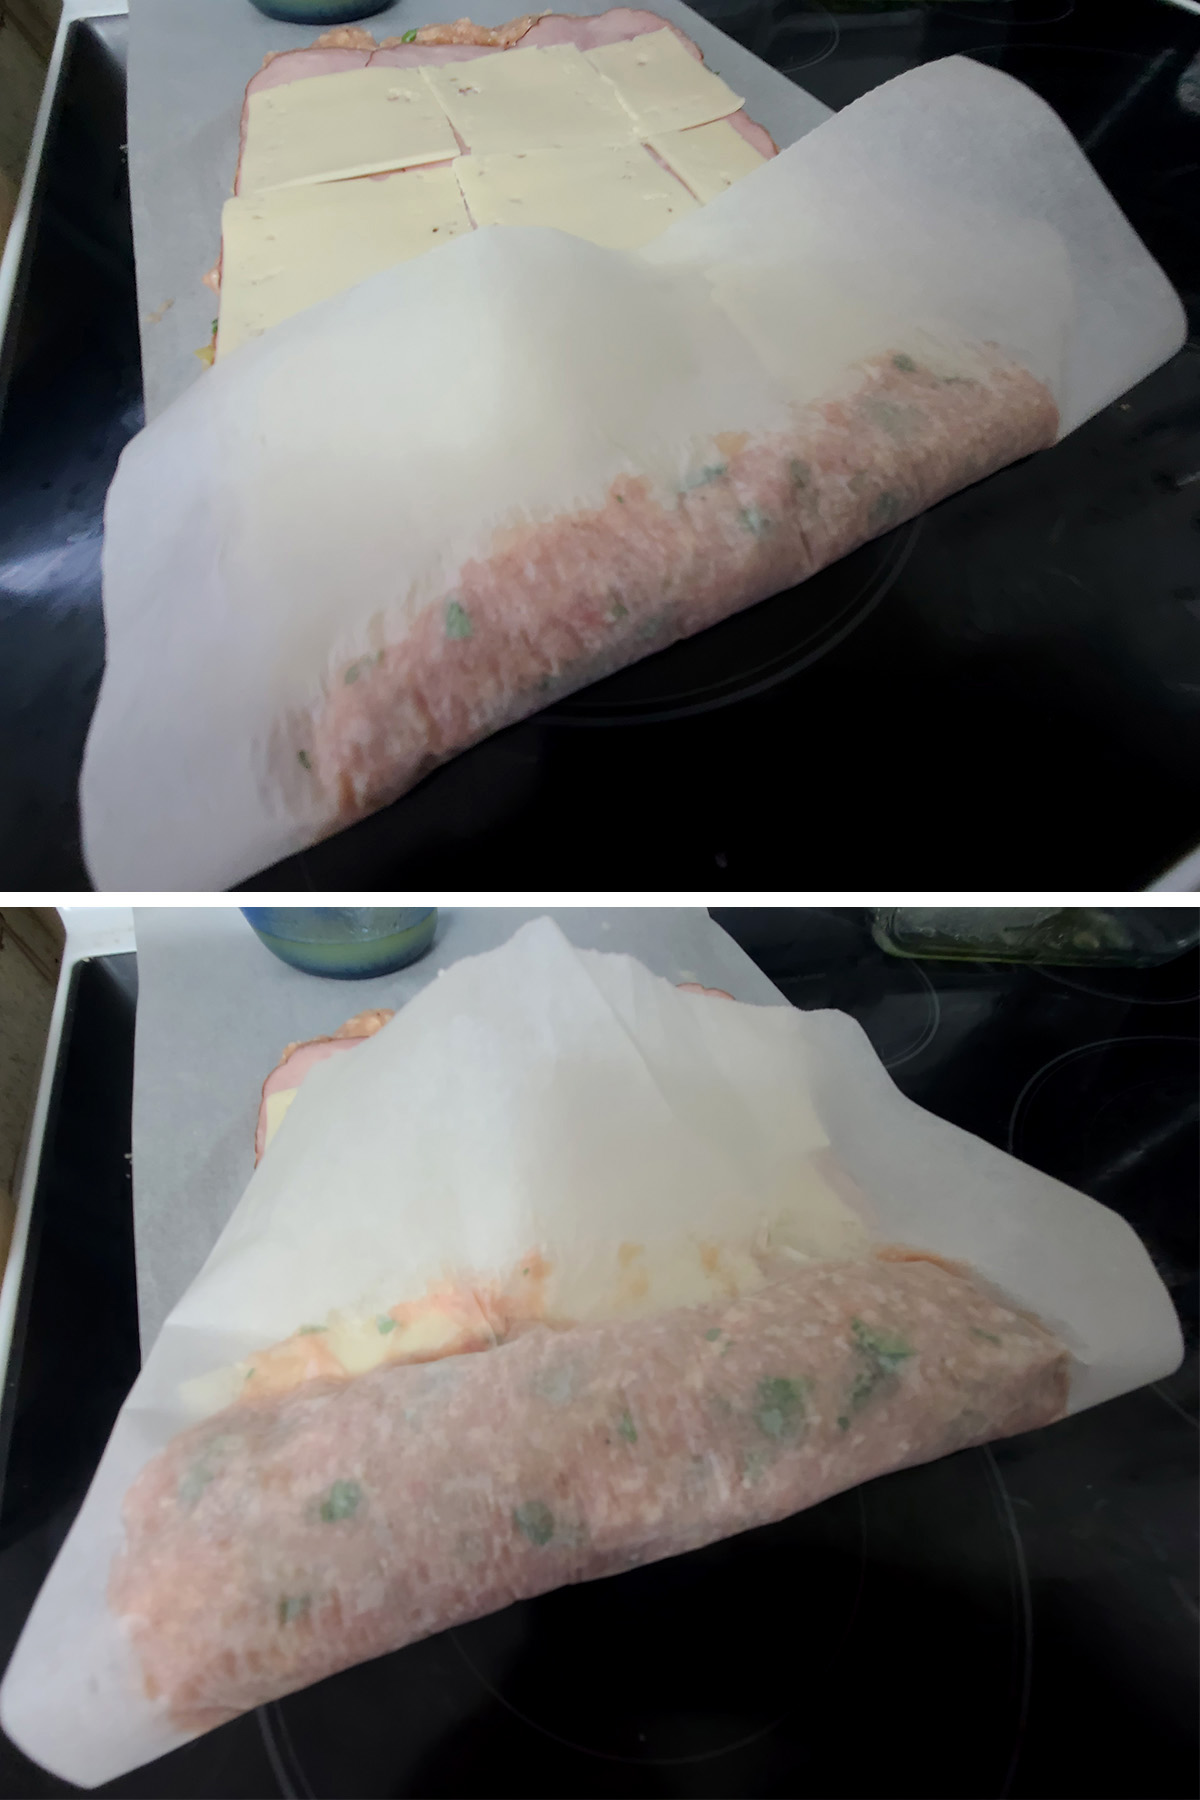 Parchment paper being used to roll up the ground chicken.